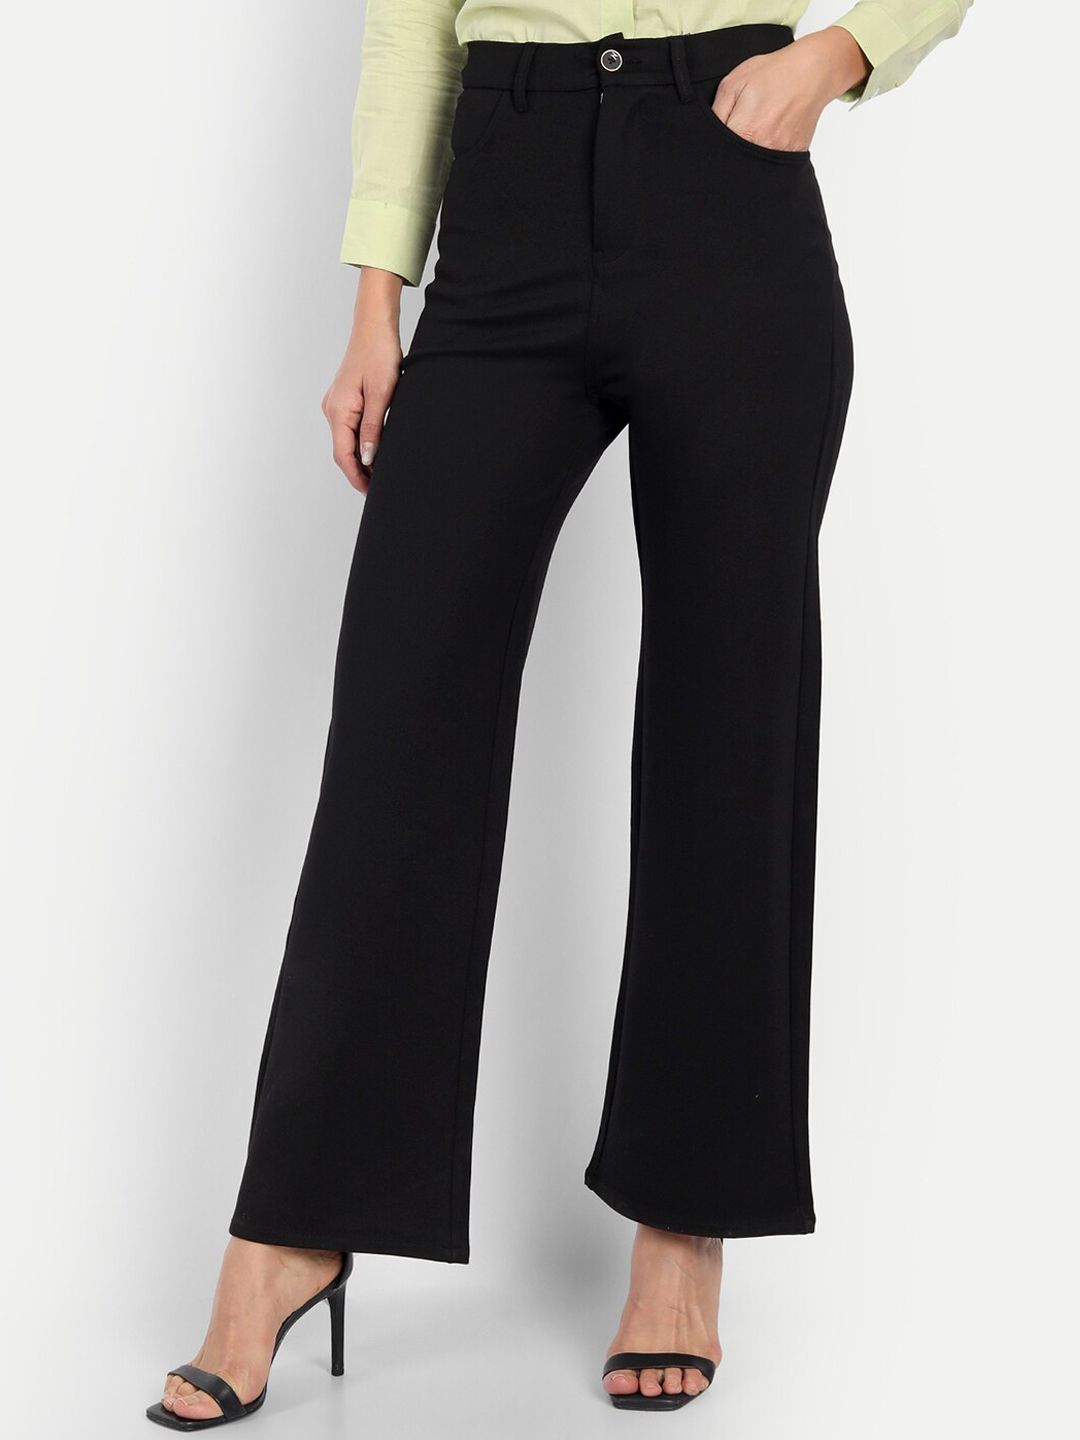 Next One Women Smart Straight Fit High-Rise Stretchable Knitted Formal Trouser Price in India